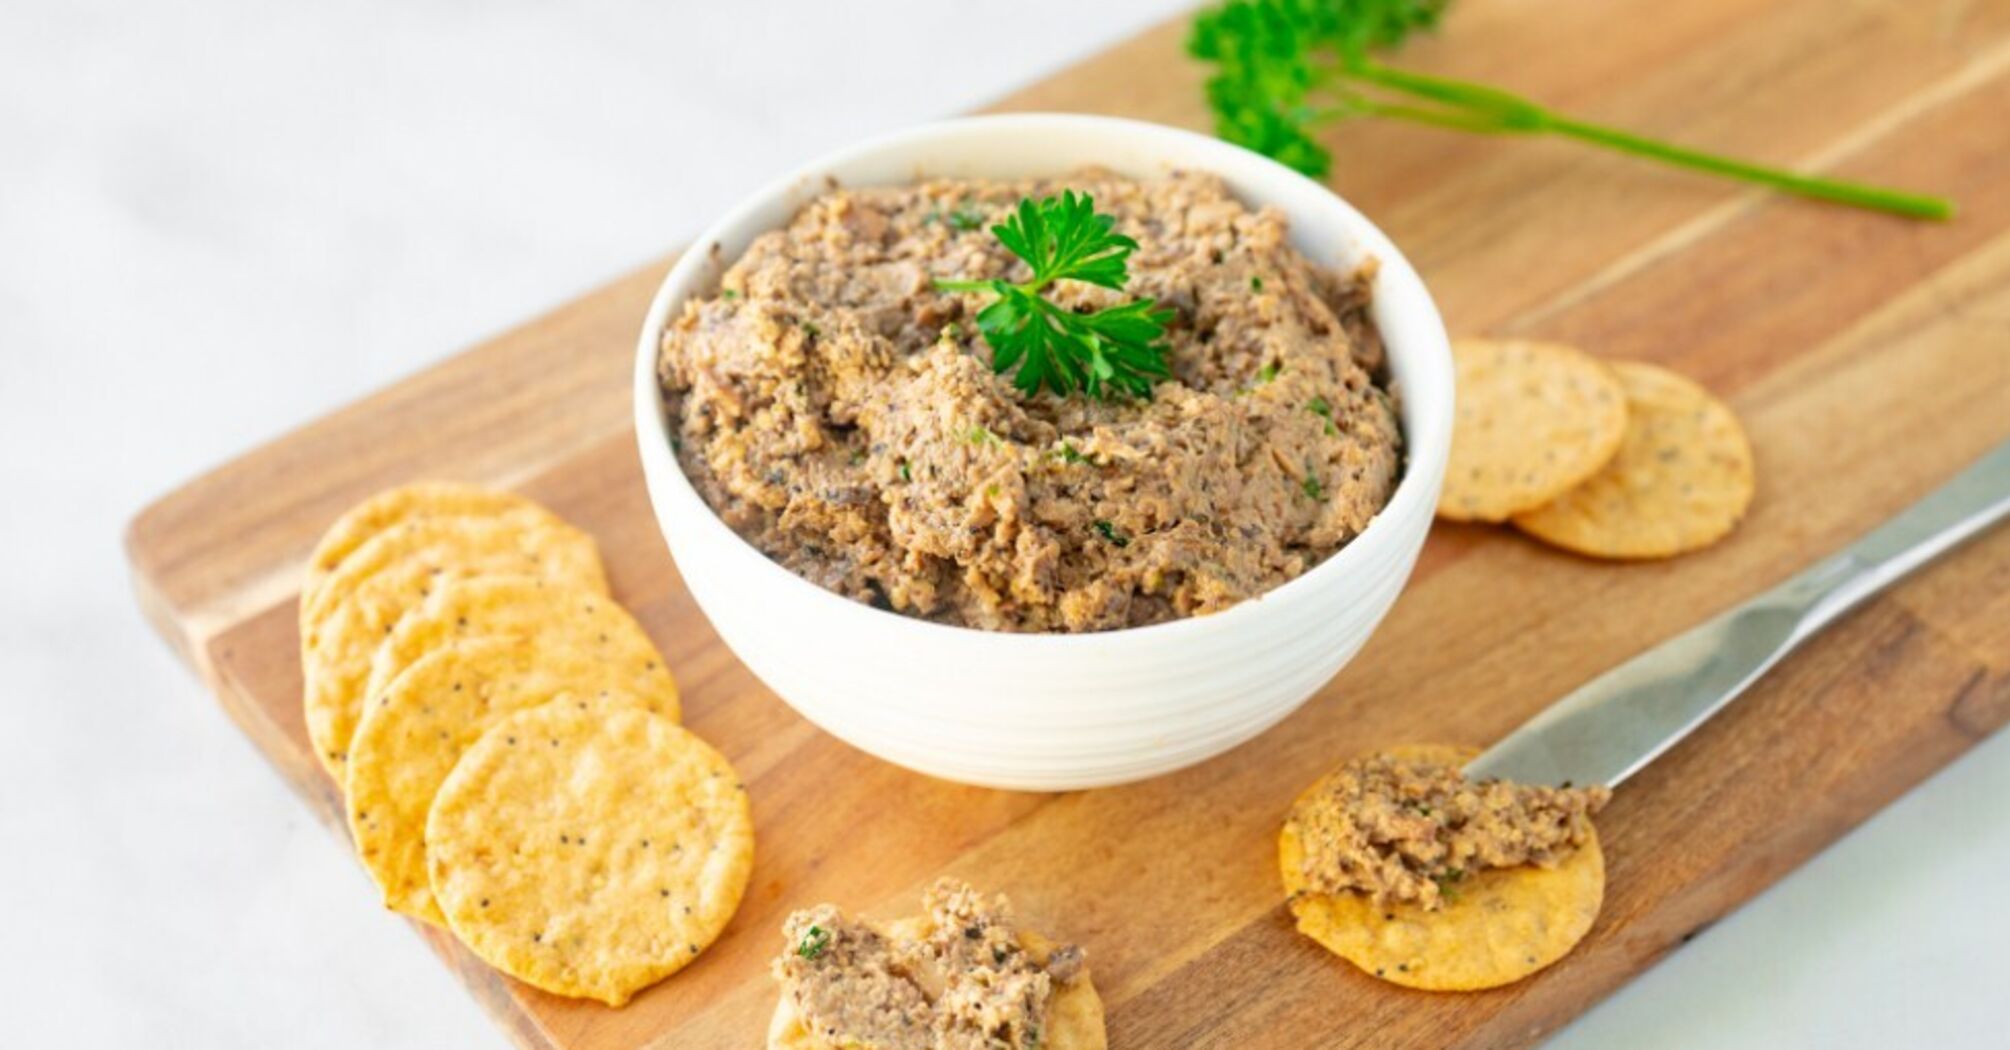 What to add to liver pate: it will be tender and flavorful